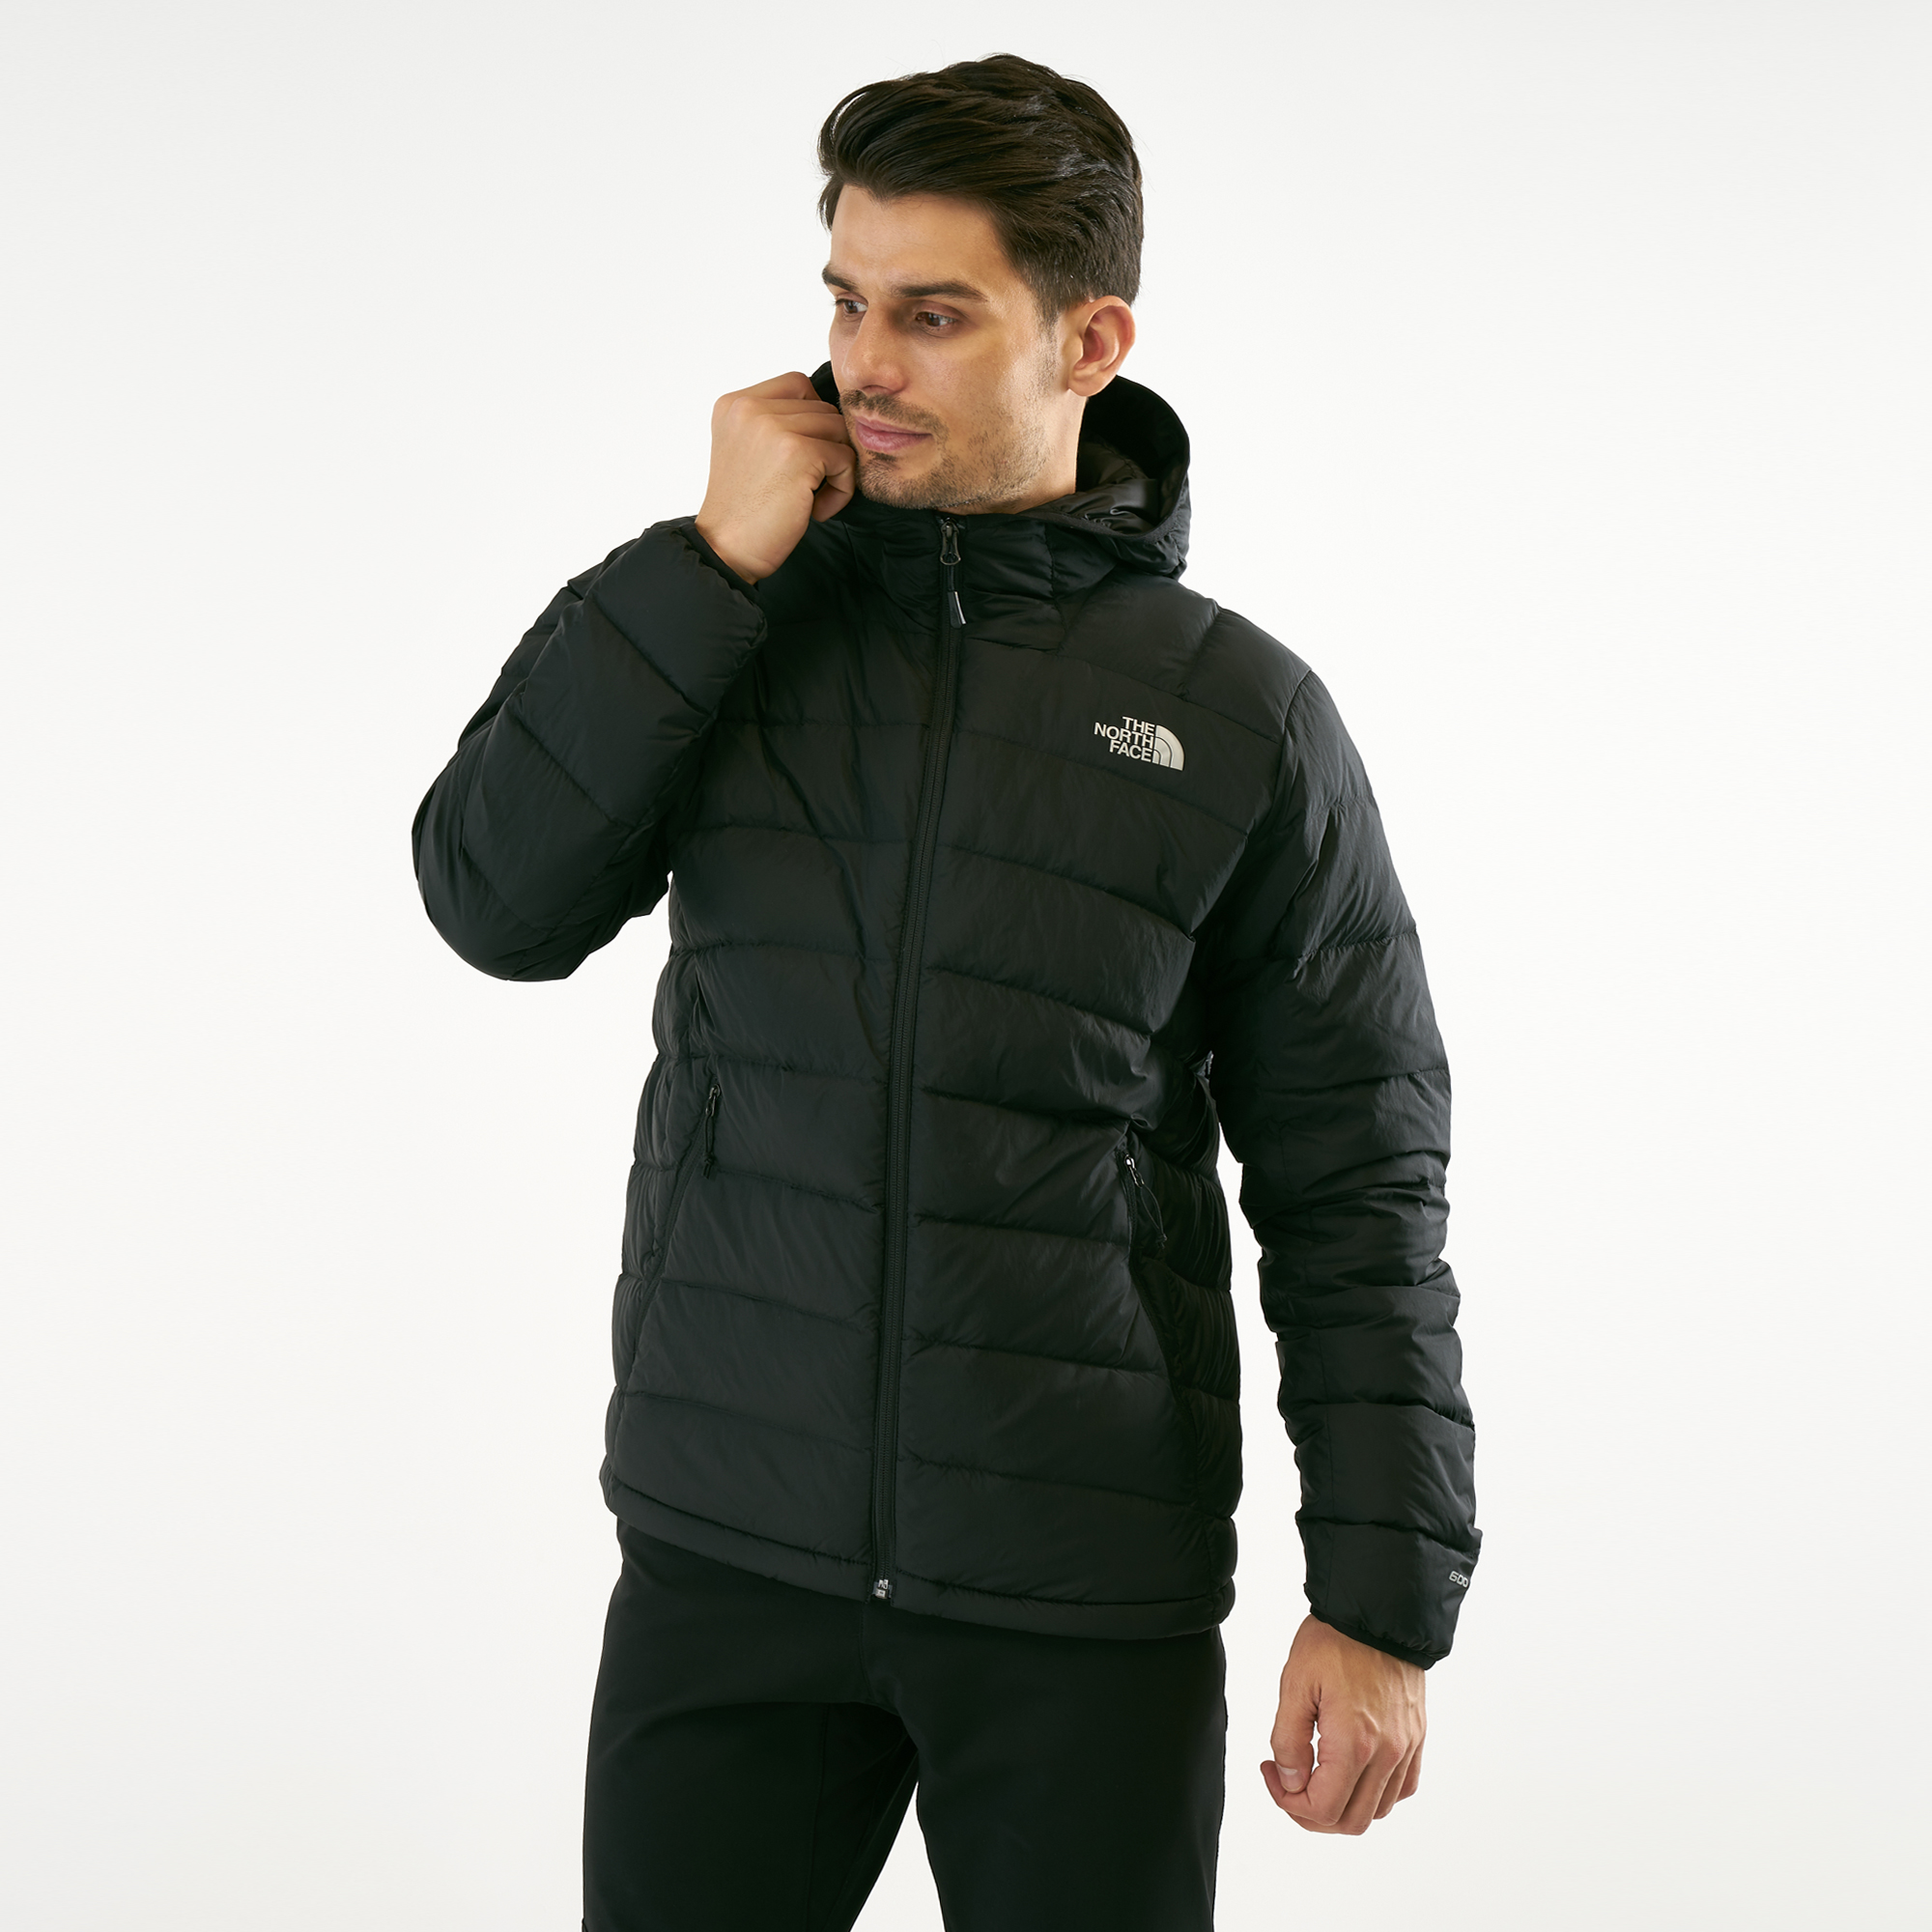 The North Face La Paz Down Jacket Black Online Shopping For Women Men Kids Fashion Lifestyle Free Delivery Returns